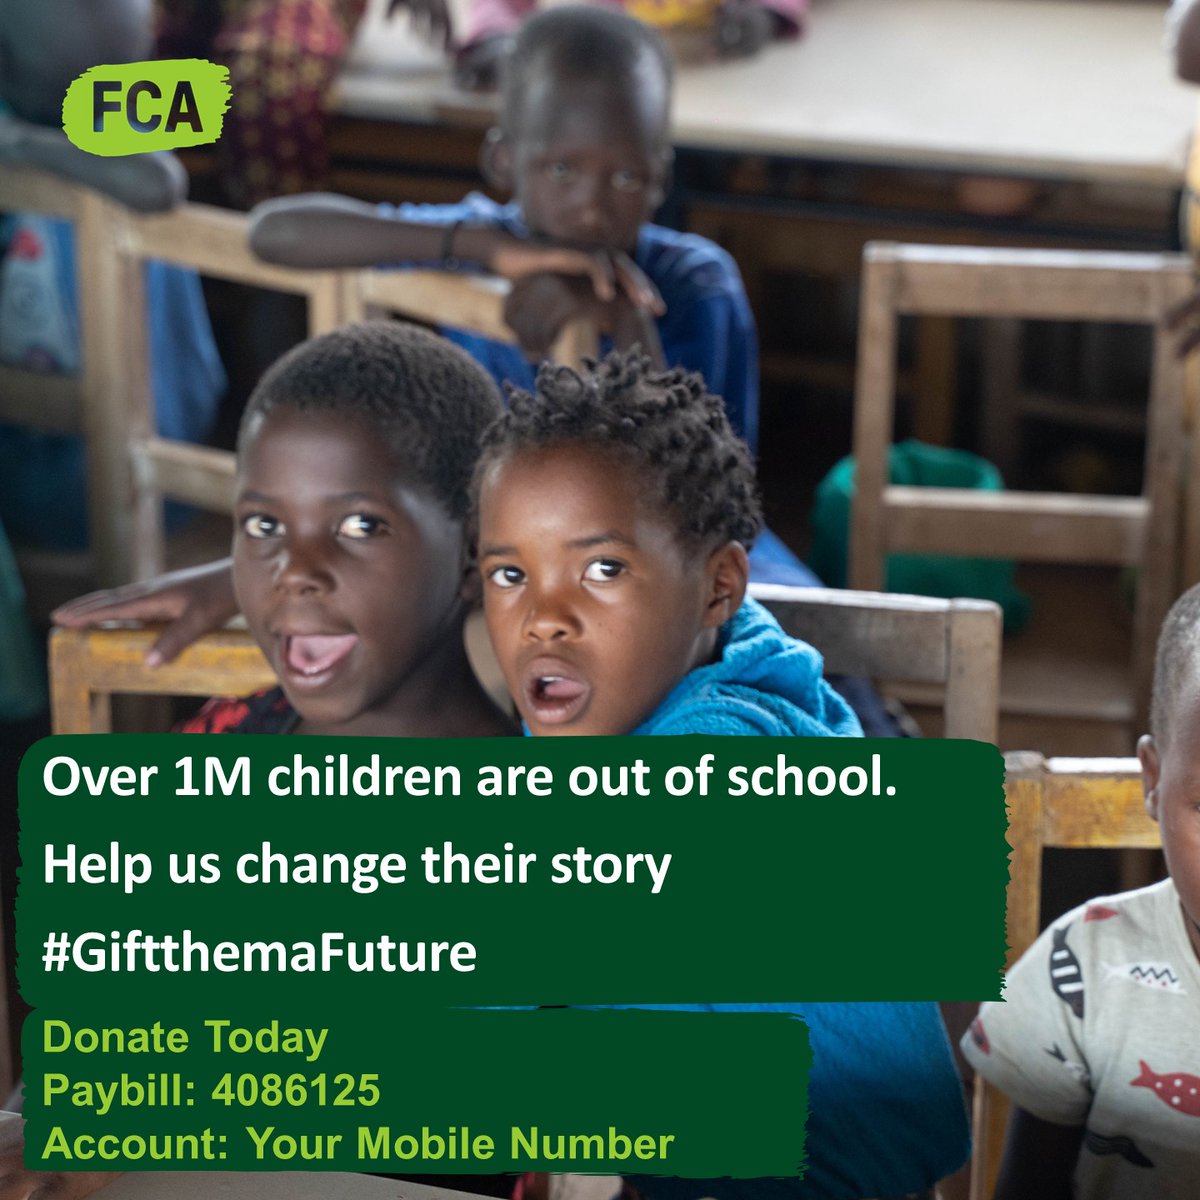 ❓Did you know that over 1 million Kenyan children are out of school?
Help us #changetheirstory and #GiftthemaFuture